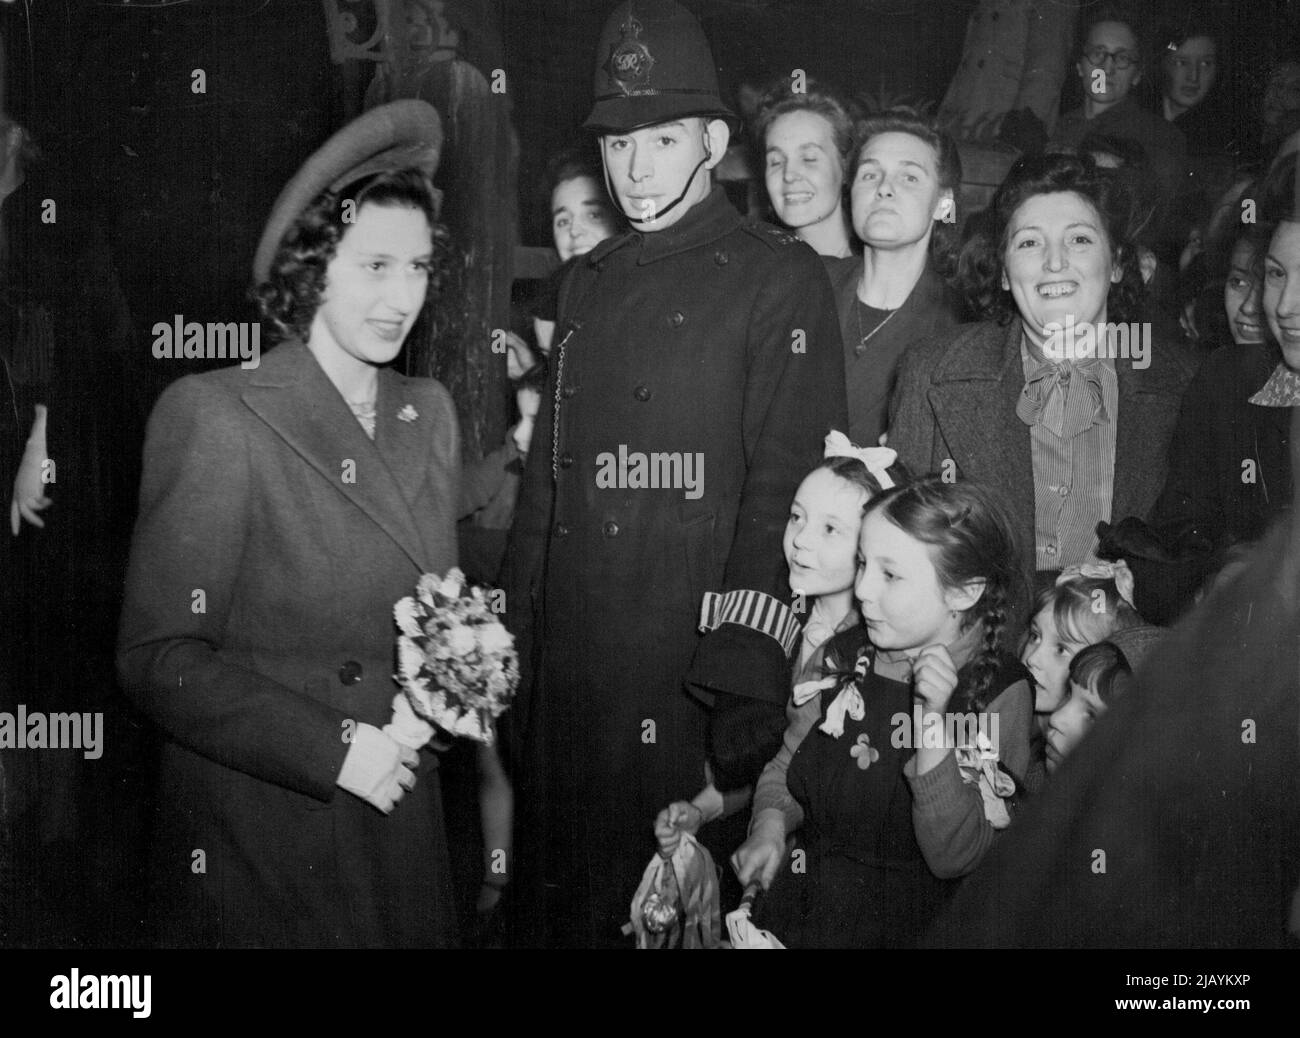 Princess Margaret Visits 'Camel Club Kids' -- Princess Margaret photographed as she left the 'Camel Club' this afternoon (Tuesday). Princess Margaret, fulfilling her first public engagement, went to Bethnal Green this afternoon (Tuesday) and met the 'Camel Club Kids'. The Camel Club - so named because it occupies the blitz-damaged 'Camel' public house - is run by University House under the children Fund. Here about a hundred Bethnal Green children meet nightly to sketch, play games, do cappentry and other hobbies. The Princess had previously this afternoon visited a similar club at the Hepscot Stock Photo